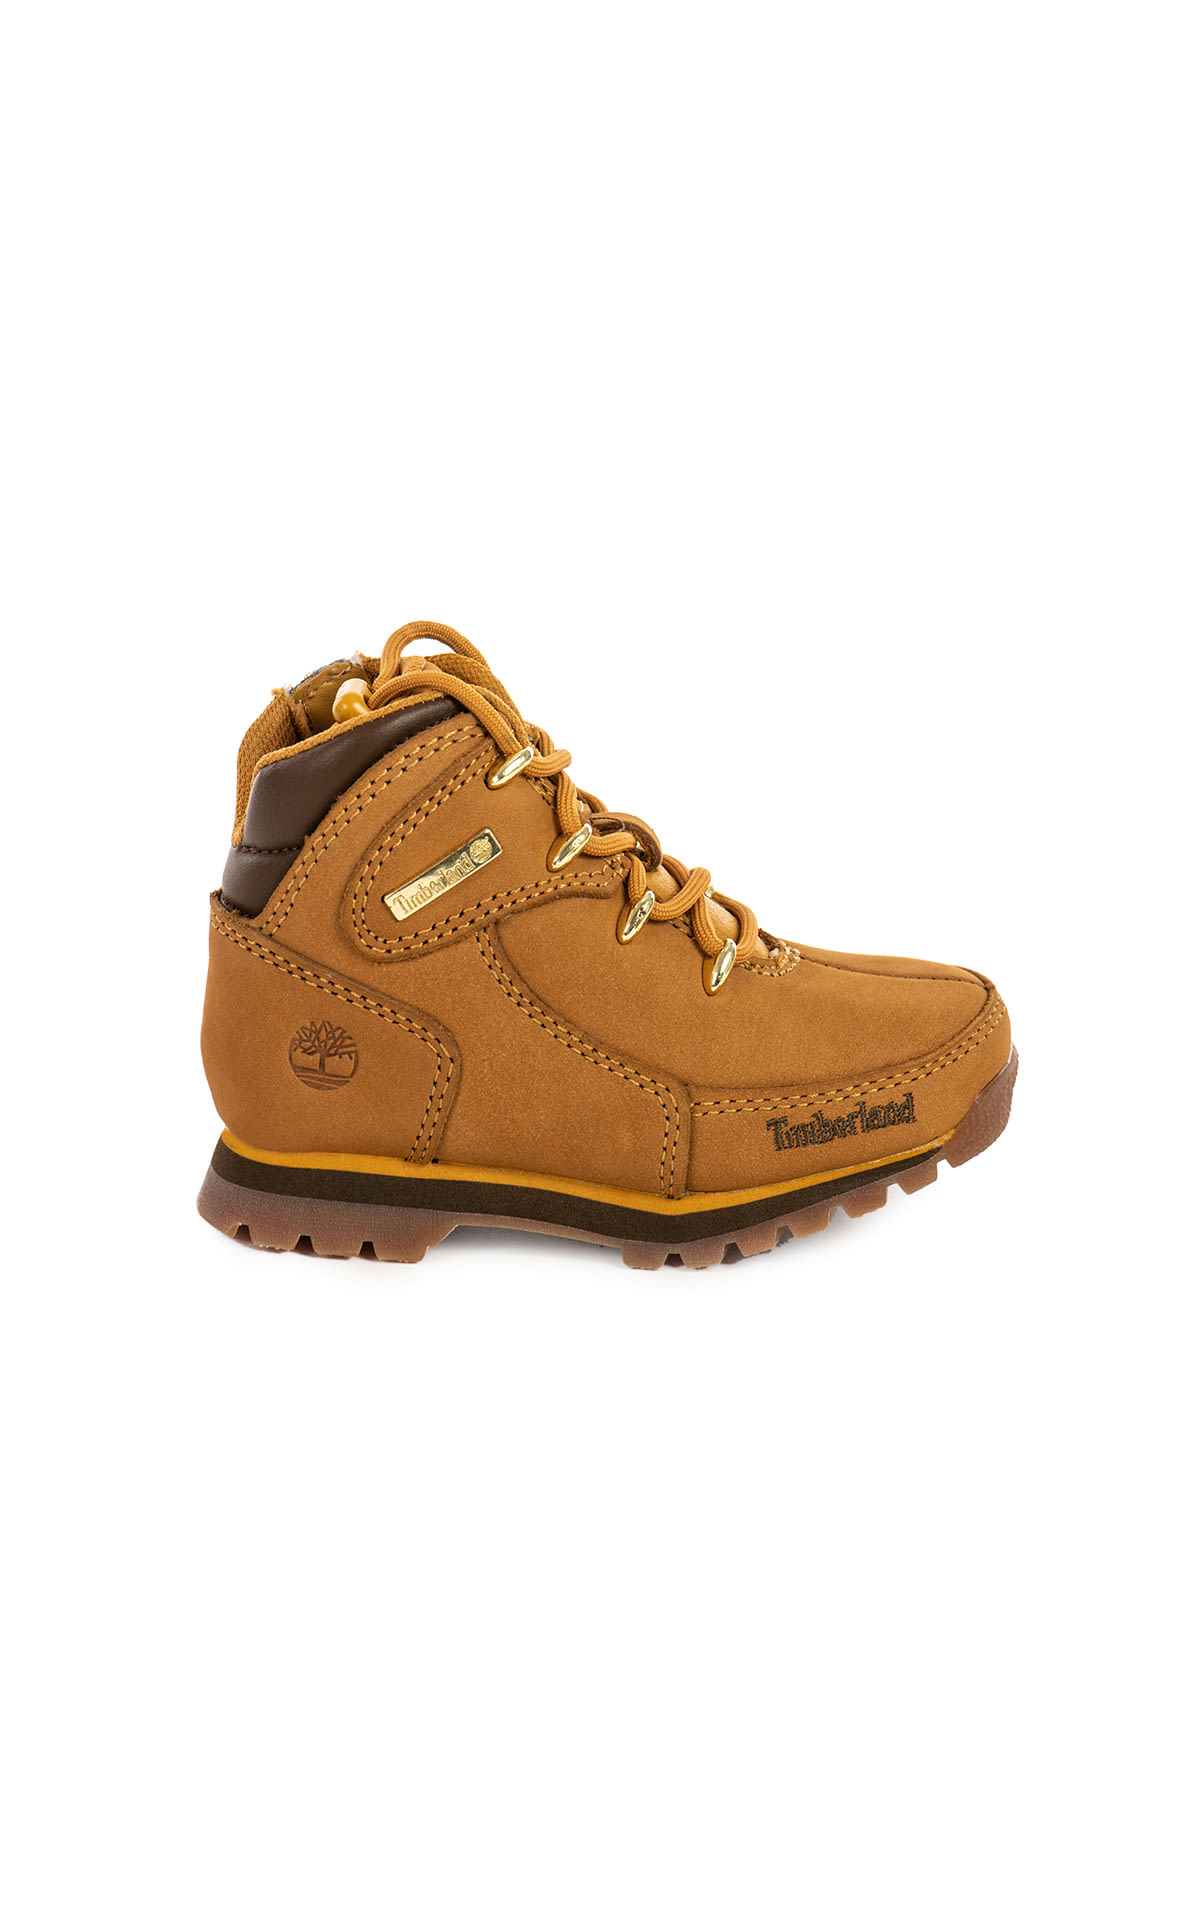 Timberland Hiker shoes